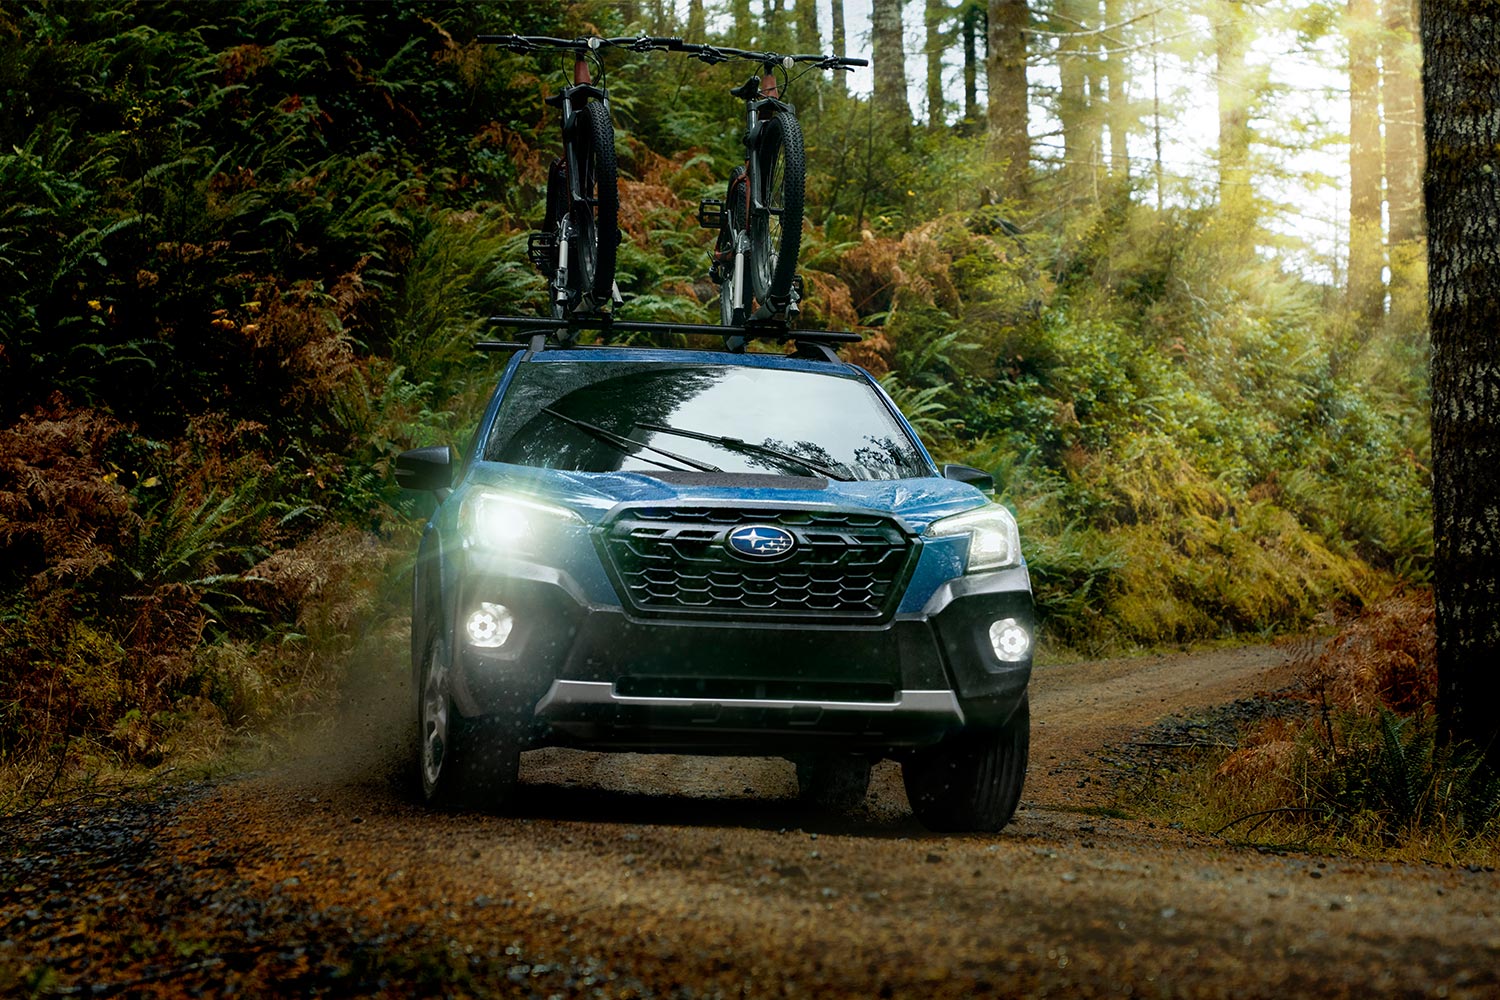 The Subaru Forester Wilderness driving in the forest with two bikes on the roof rack